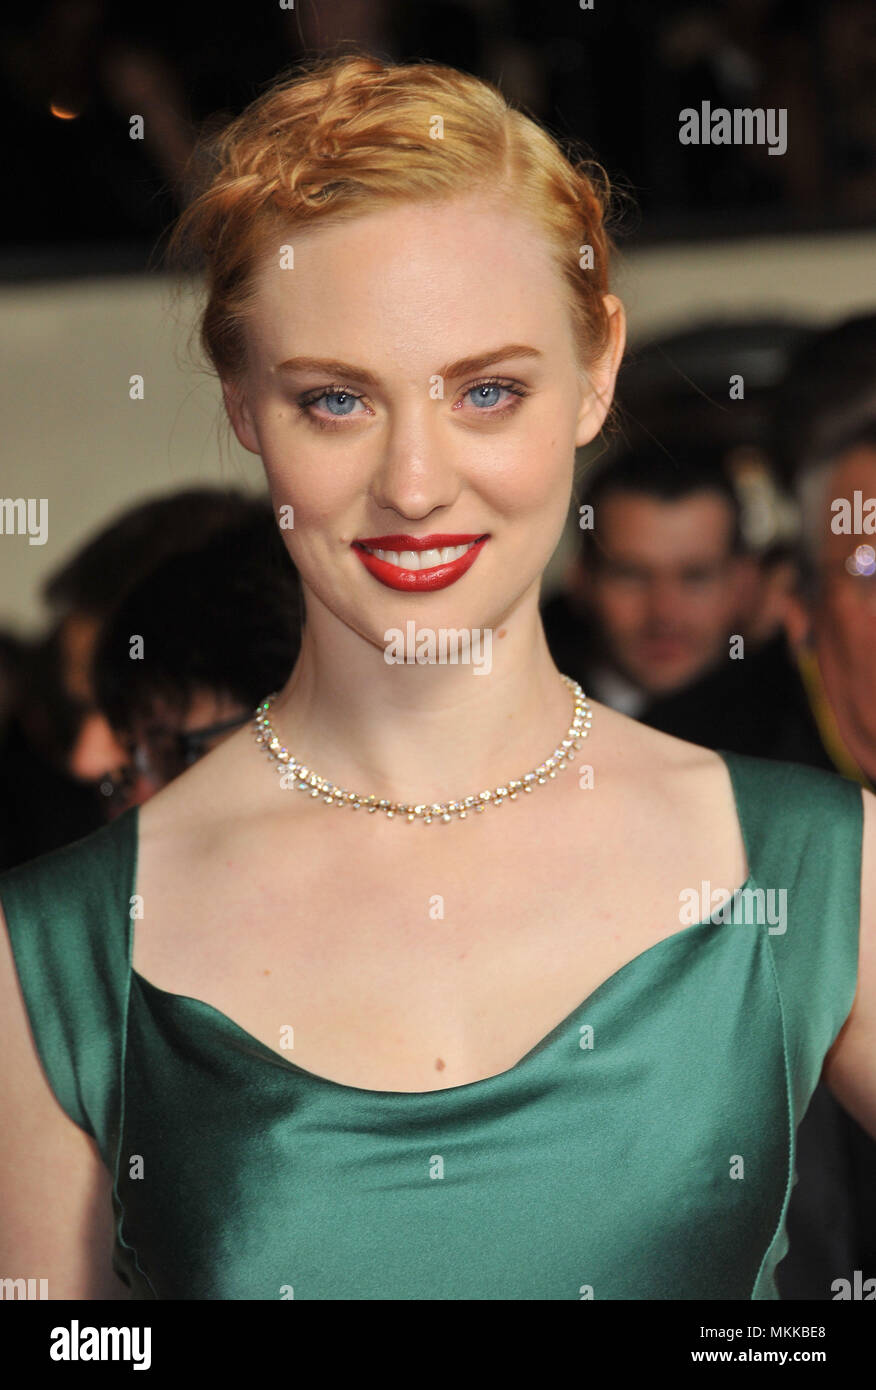 Deborah Ann Woll  at The DGA-Awards 2012 at the Kodak Theatre In Los Angeles.Deborah Ann Woll  137 Red Carpet Event, Vertical, USA, Film Industry, Celebrities,  Photography, Bestof, Arts Culture and Entertainment, Topix Celebrities fashion /  Vertical, Best of, Event in Hollywood Life - California,  Red Carpet and backstage, USA, Film Industry, Celebrities,  movie celebrities, TV celebrities, Music celebrities, Photography, Bestof, Arts Culture and Entertainment,  Topix, headshot, vertical, one person,, from the year , 2012, inquiry tsuni@Gamma-USA.com Stock Photo